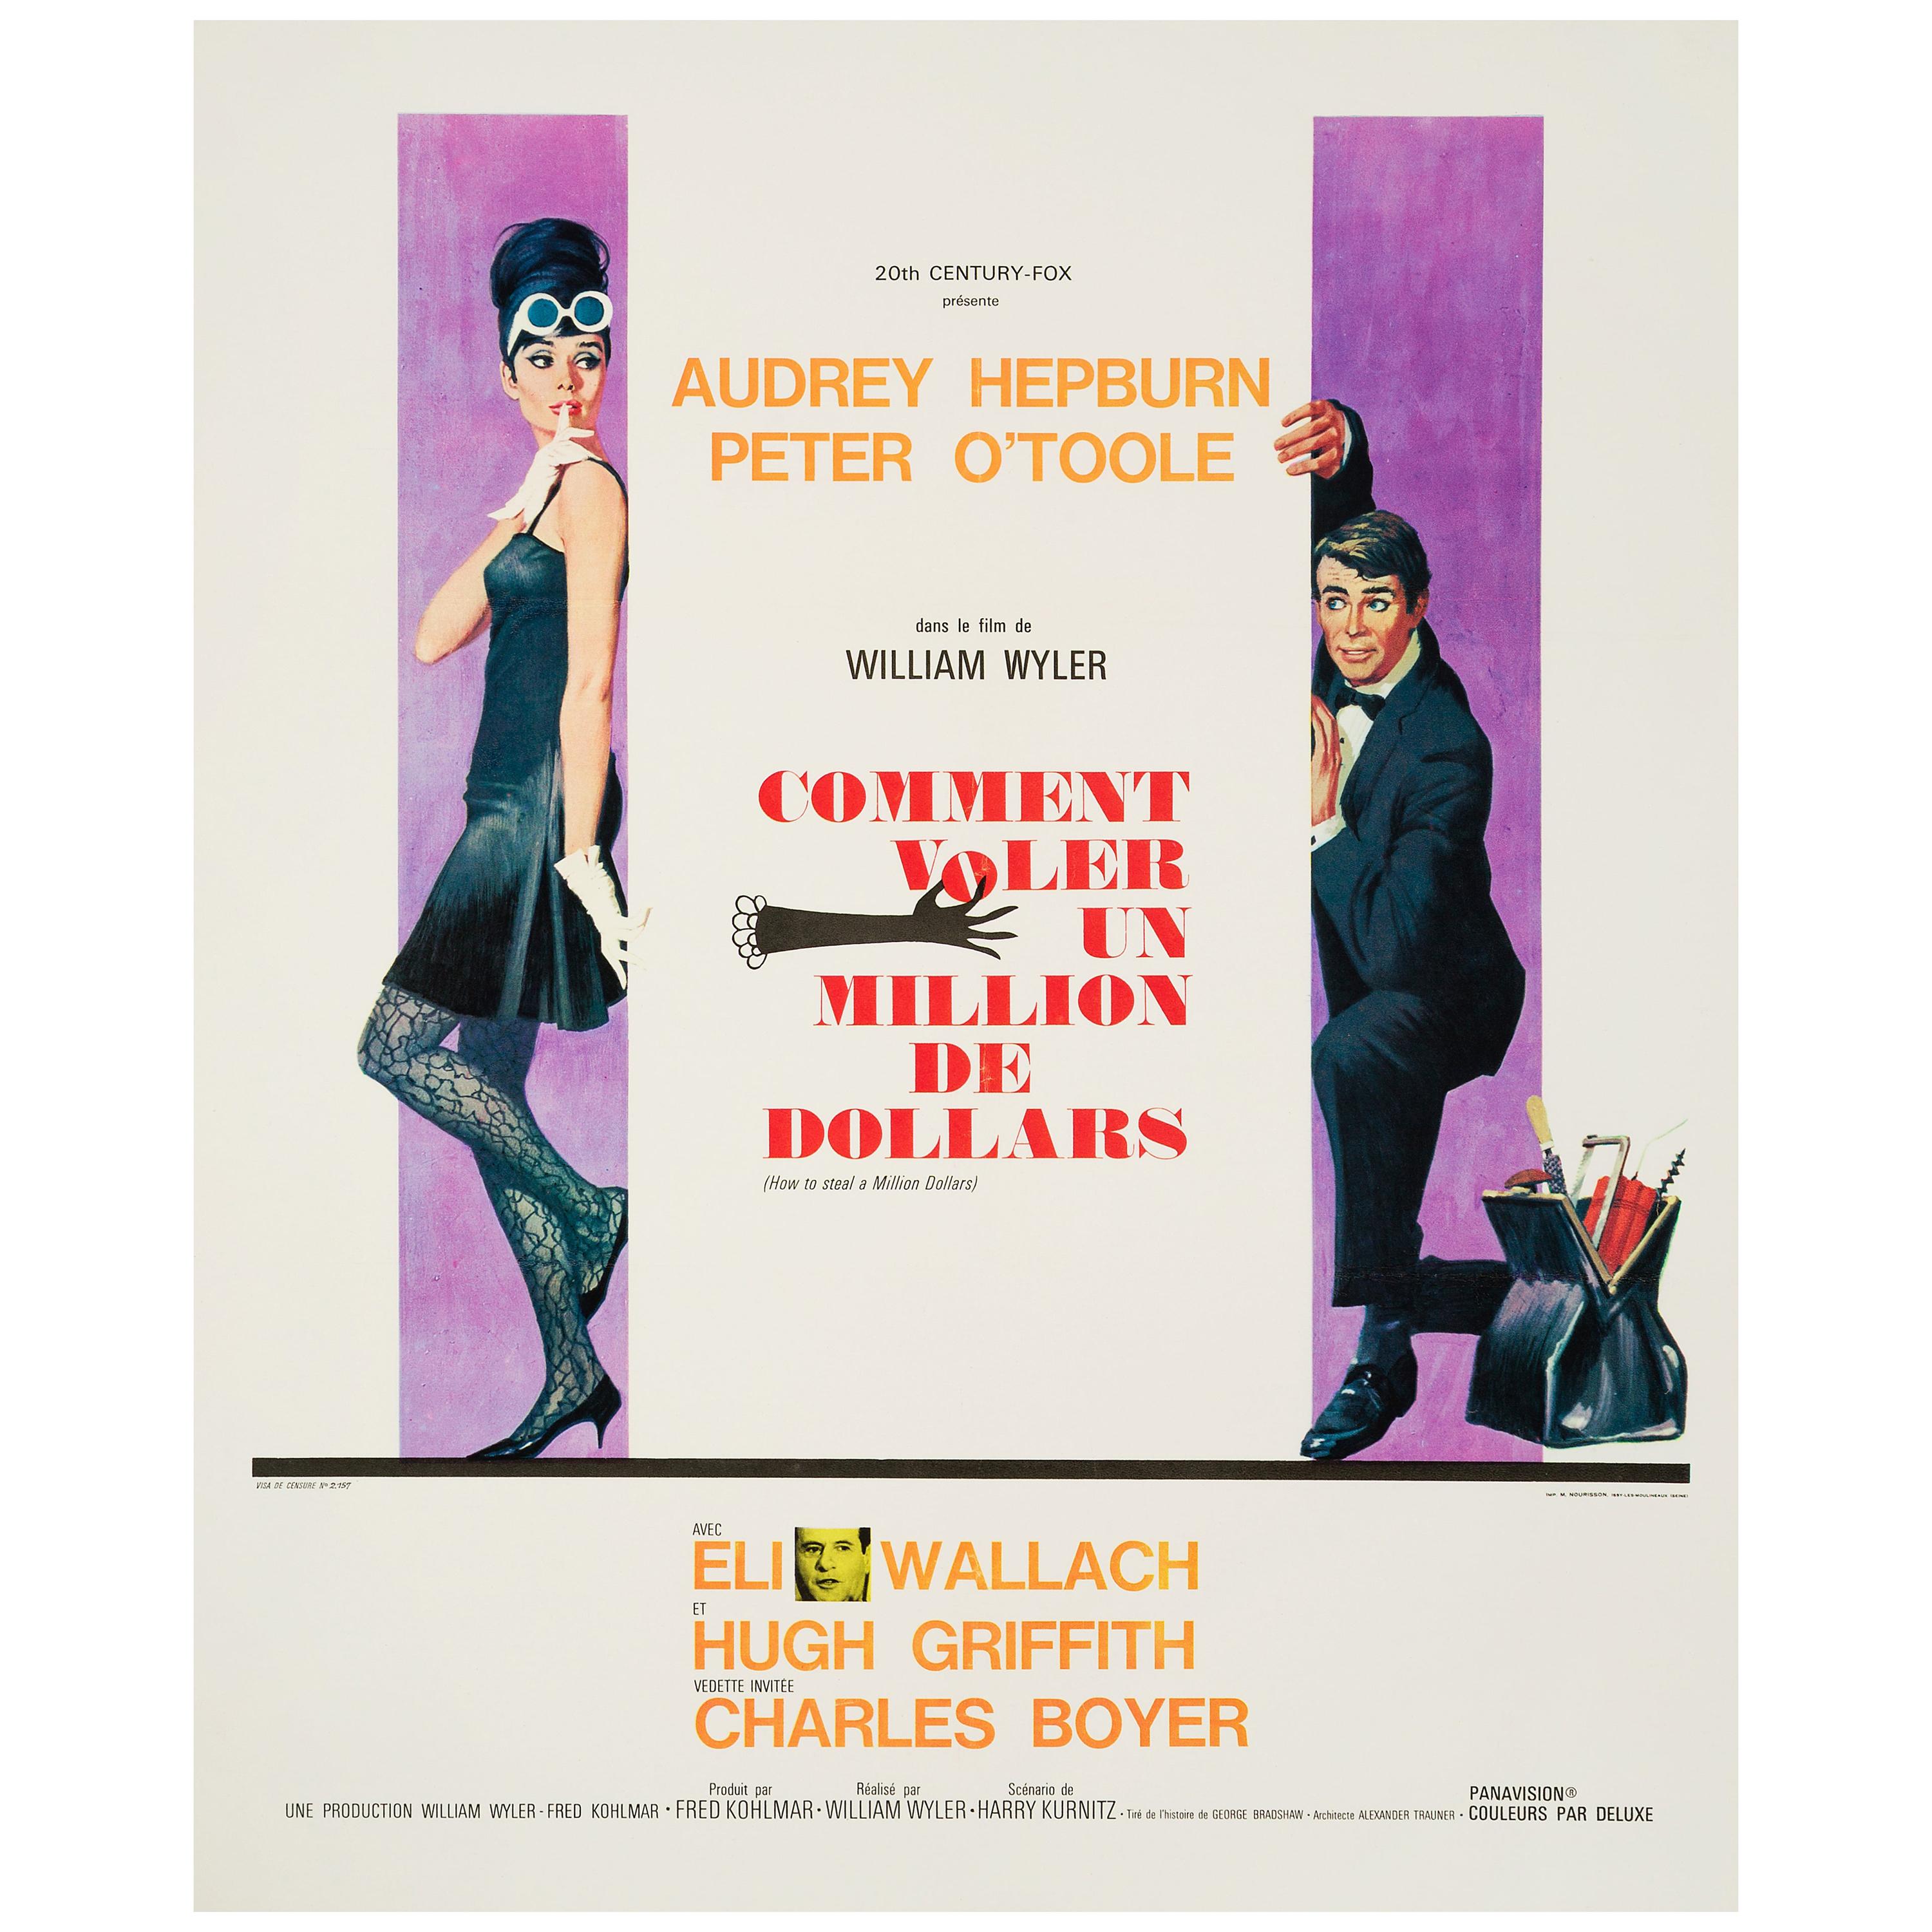 Audrey How To Steal A Million Posters - 3 For Sale on 1stDibs | steal poster, steal posters